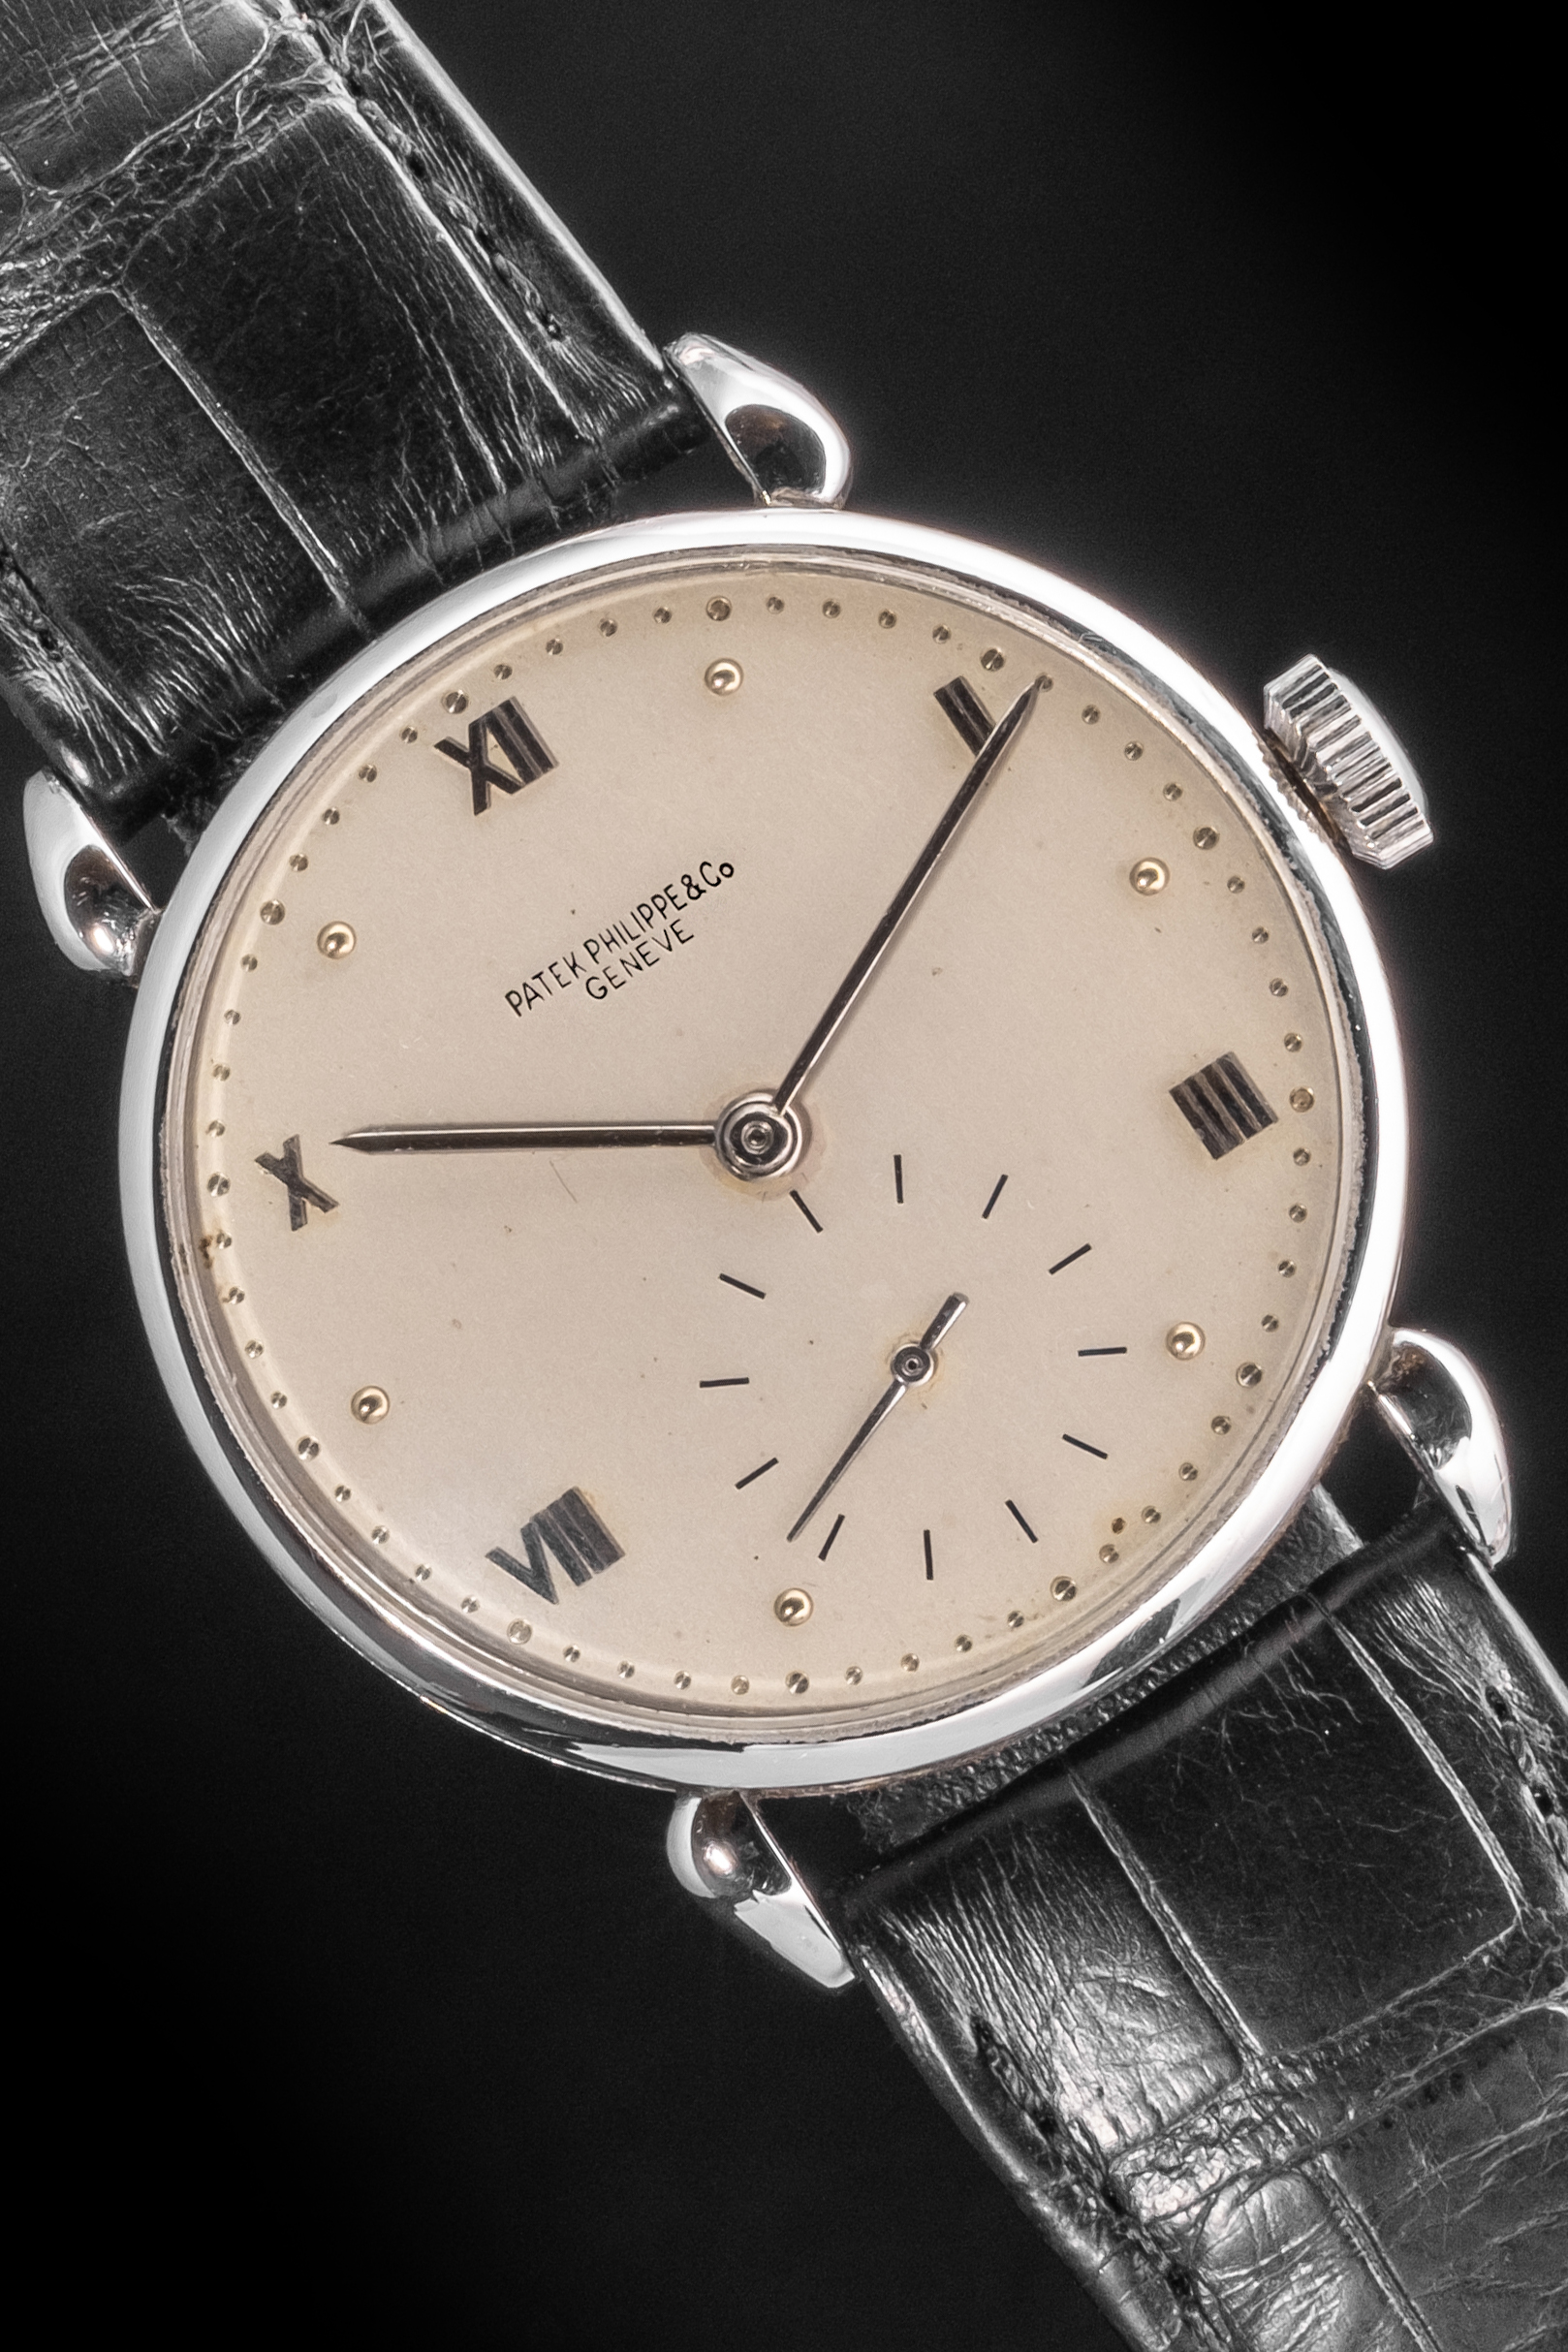 Vintage Watches - Article # 9037